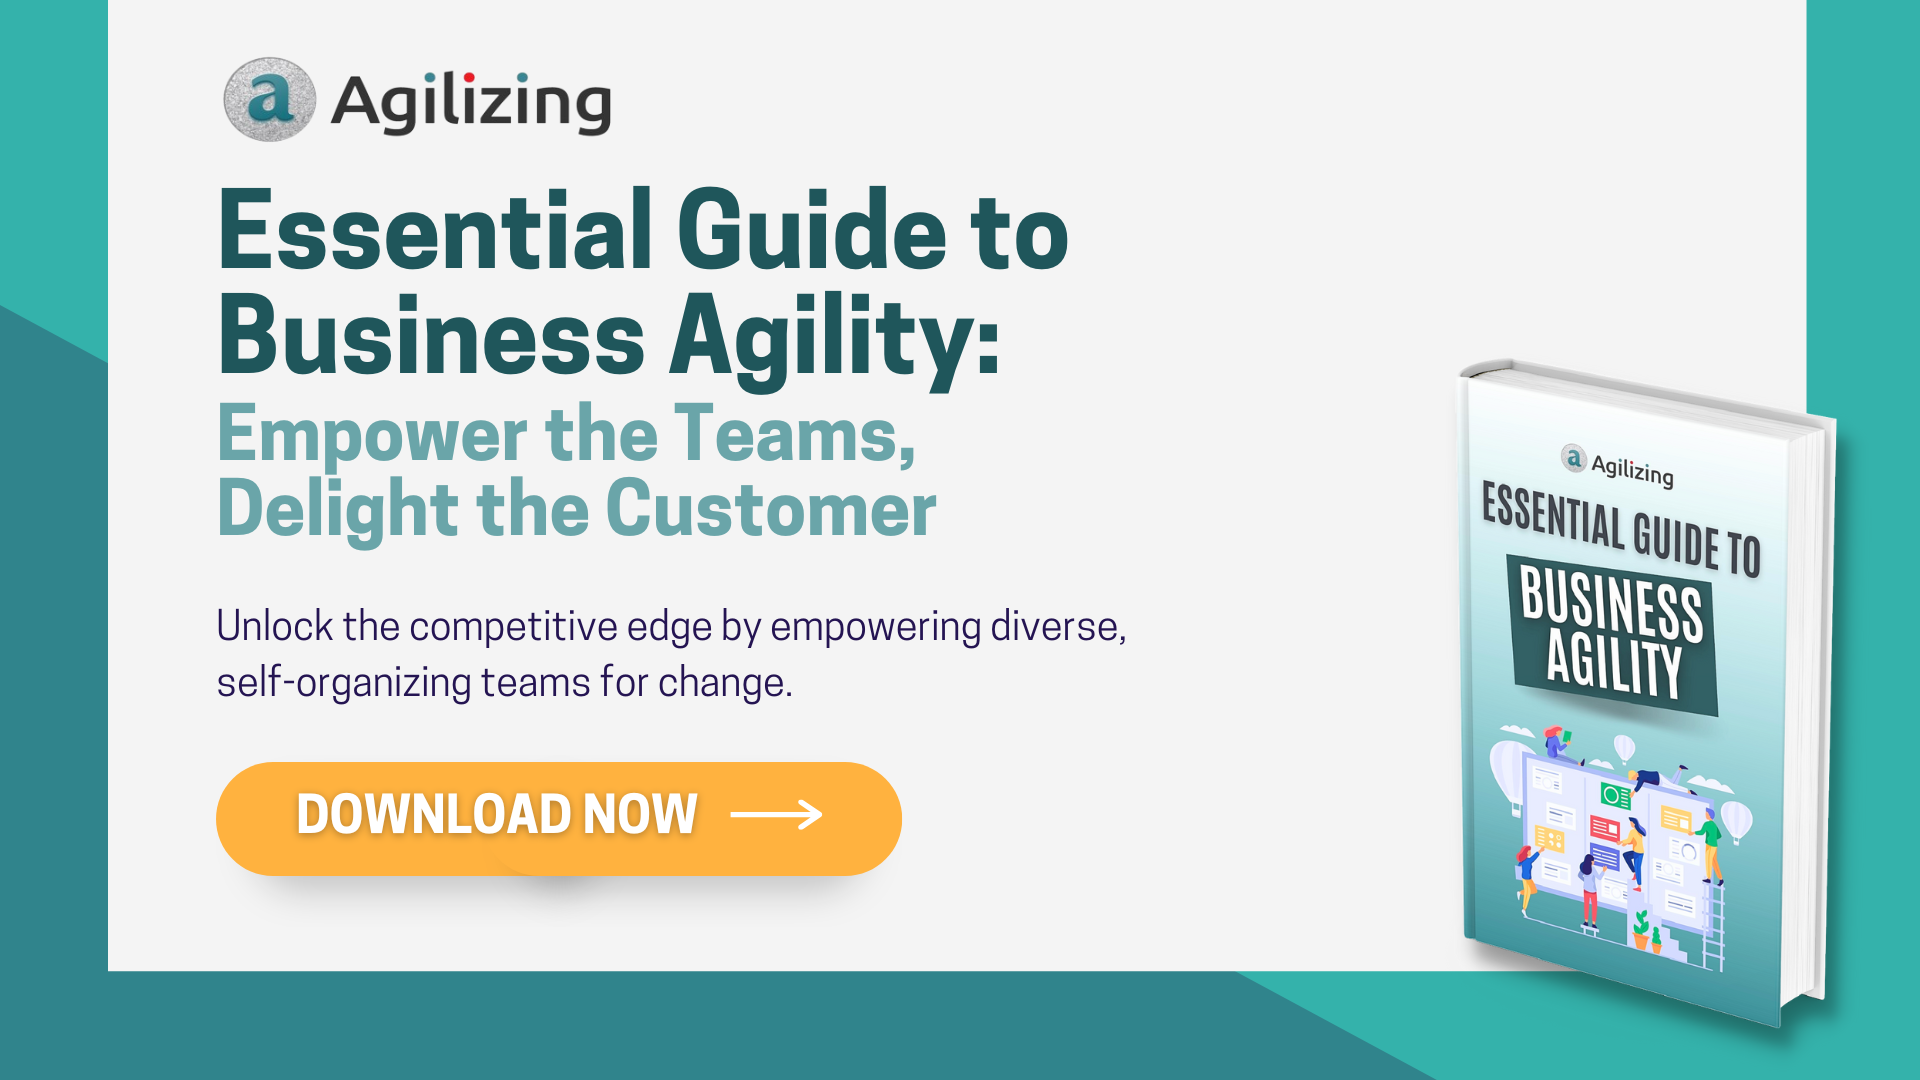 Team Empowerment_Customer Value_Essential Guide to Business Agility_Agilizing